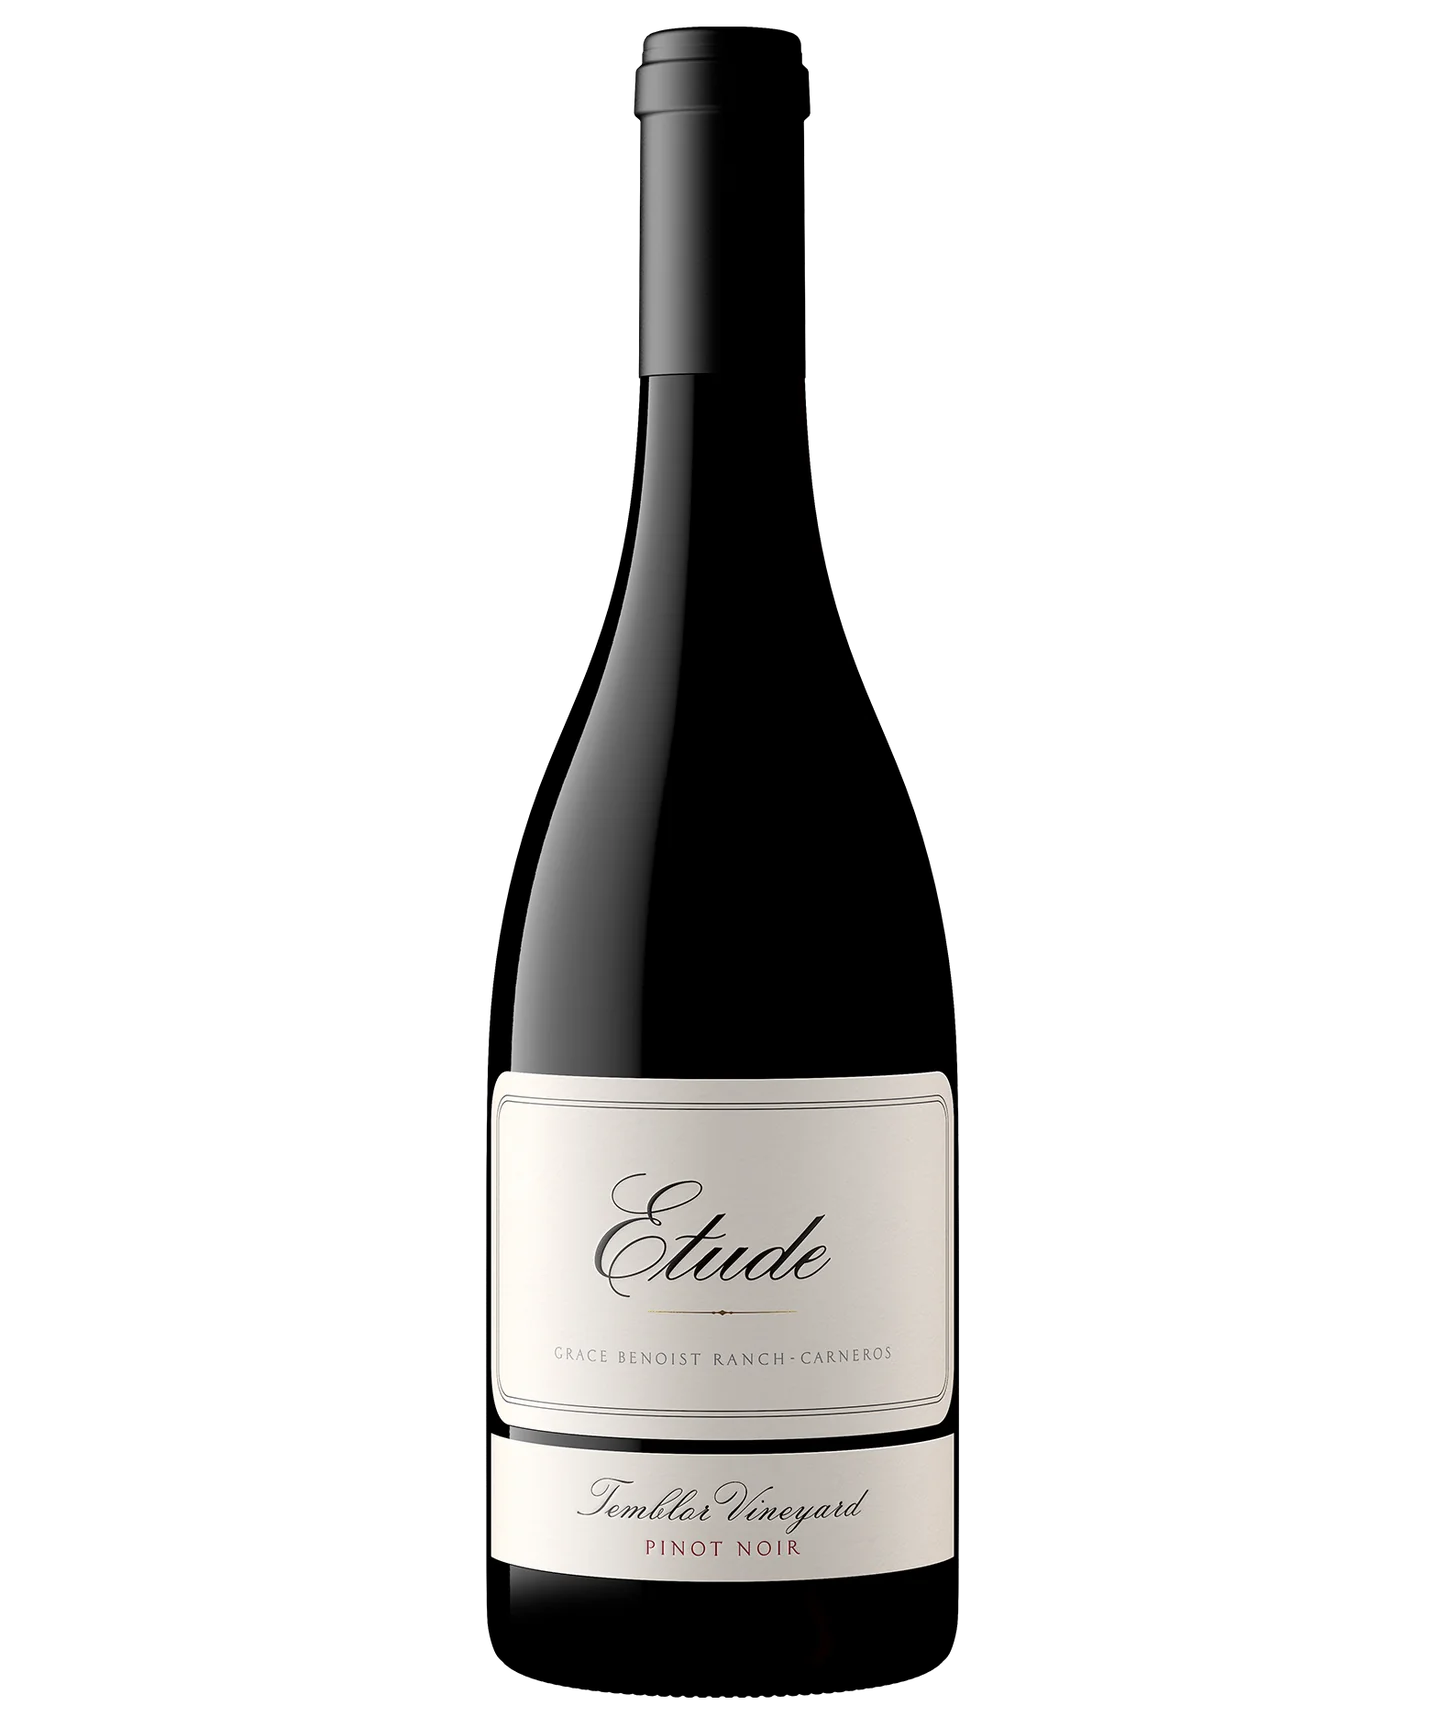 Bottle of Etude Pinot Noir Temblor from search results